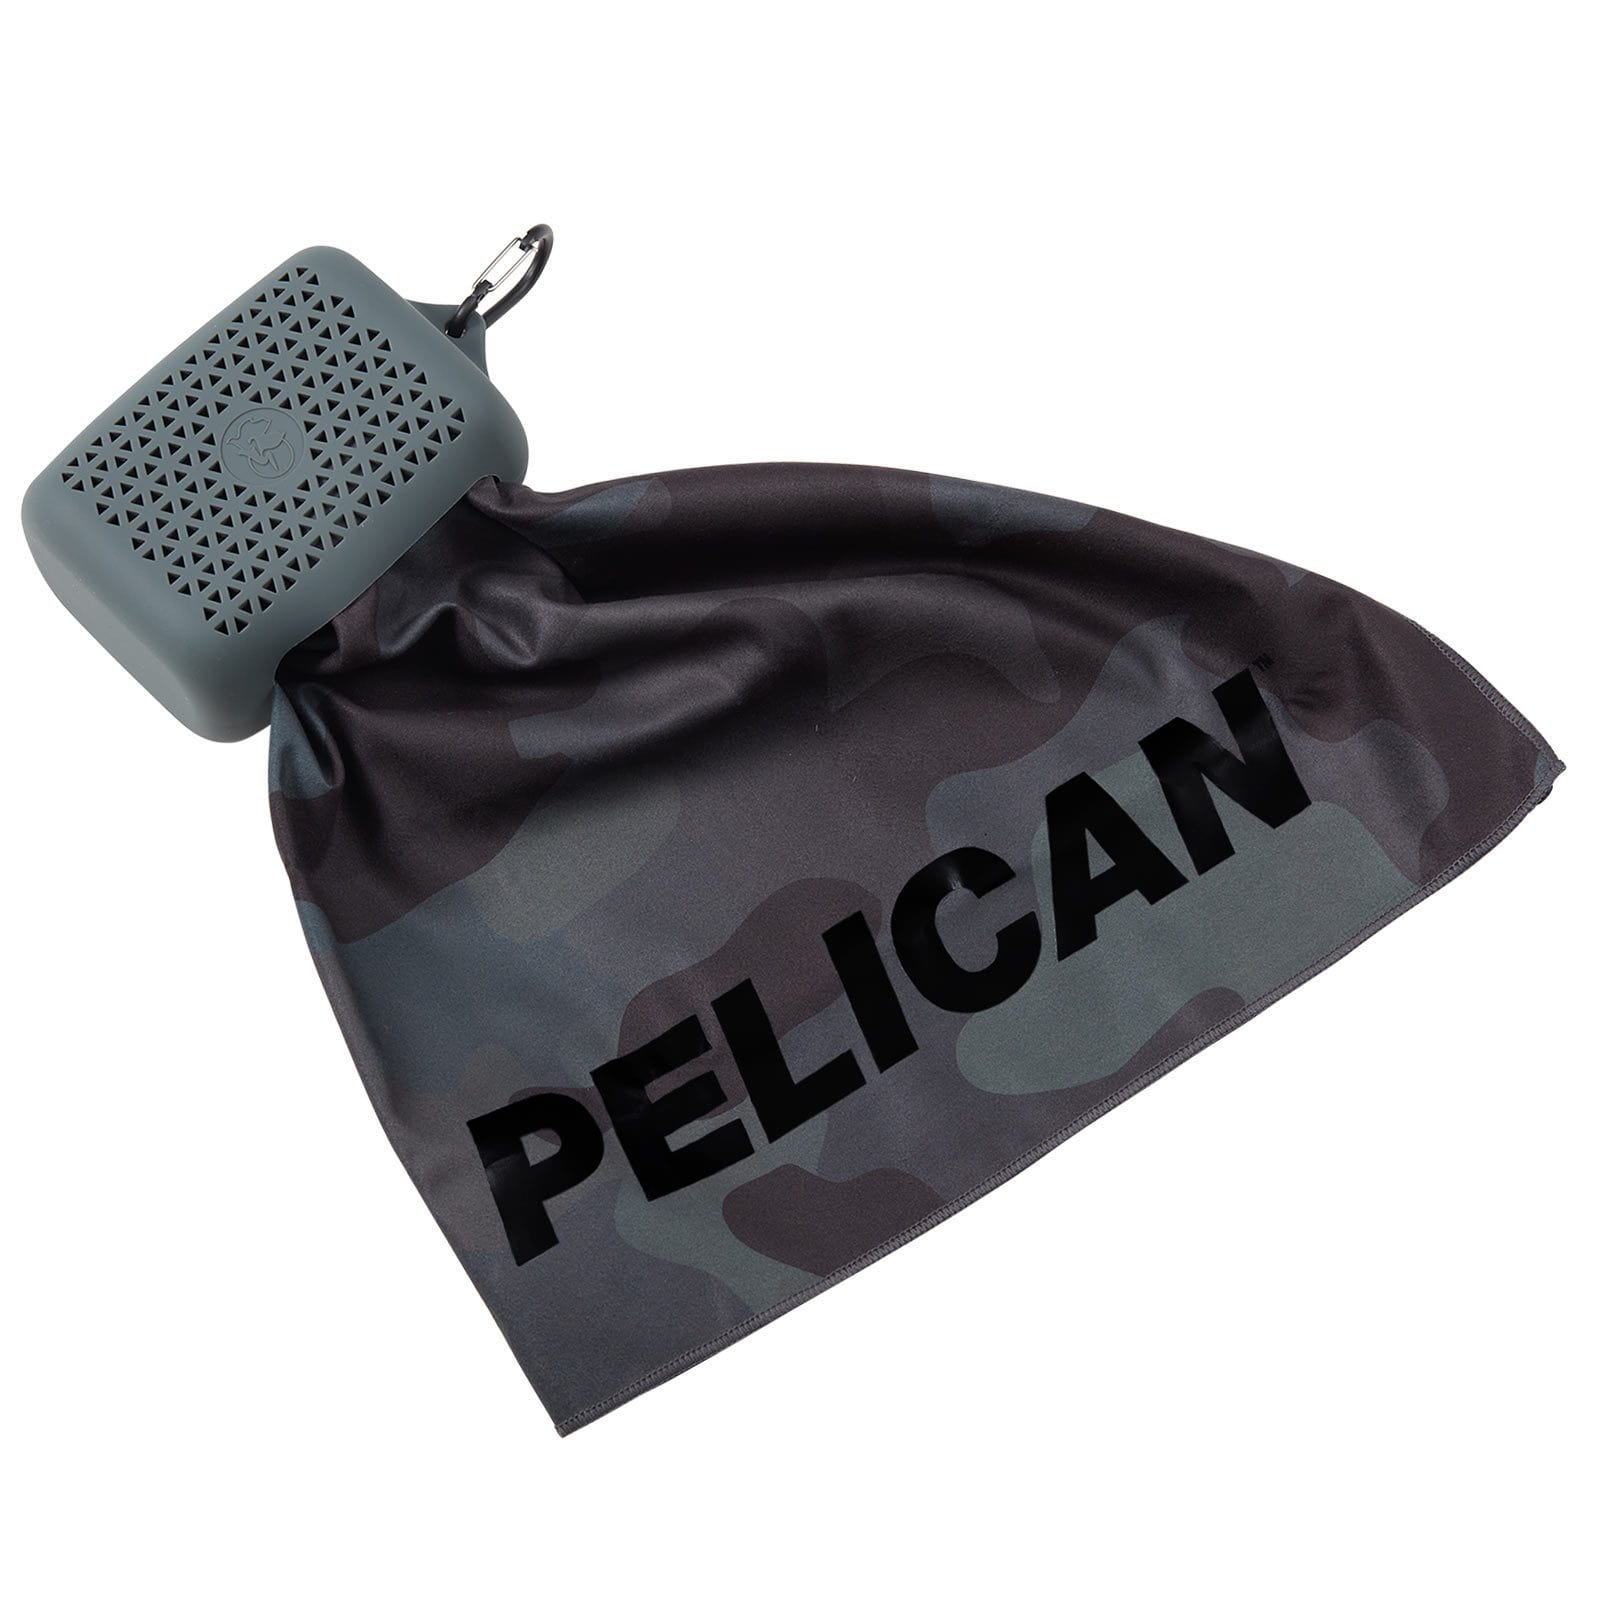 Pelican Multi Use Towel with Carry Case Shadow Camo